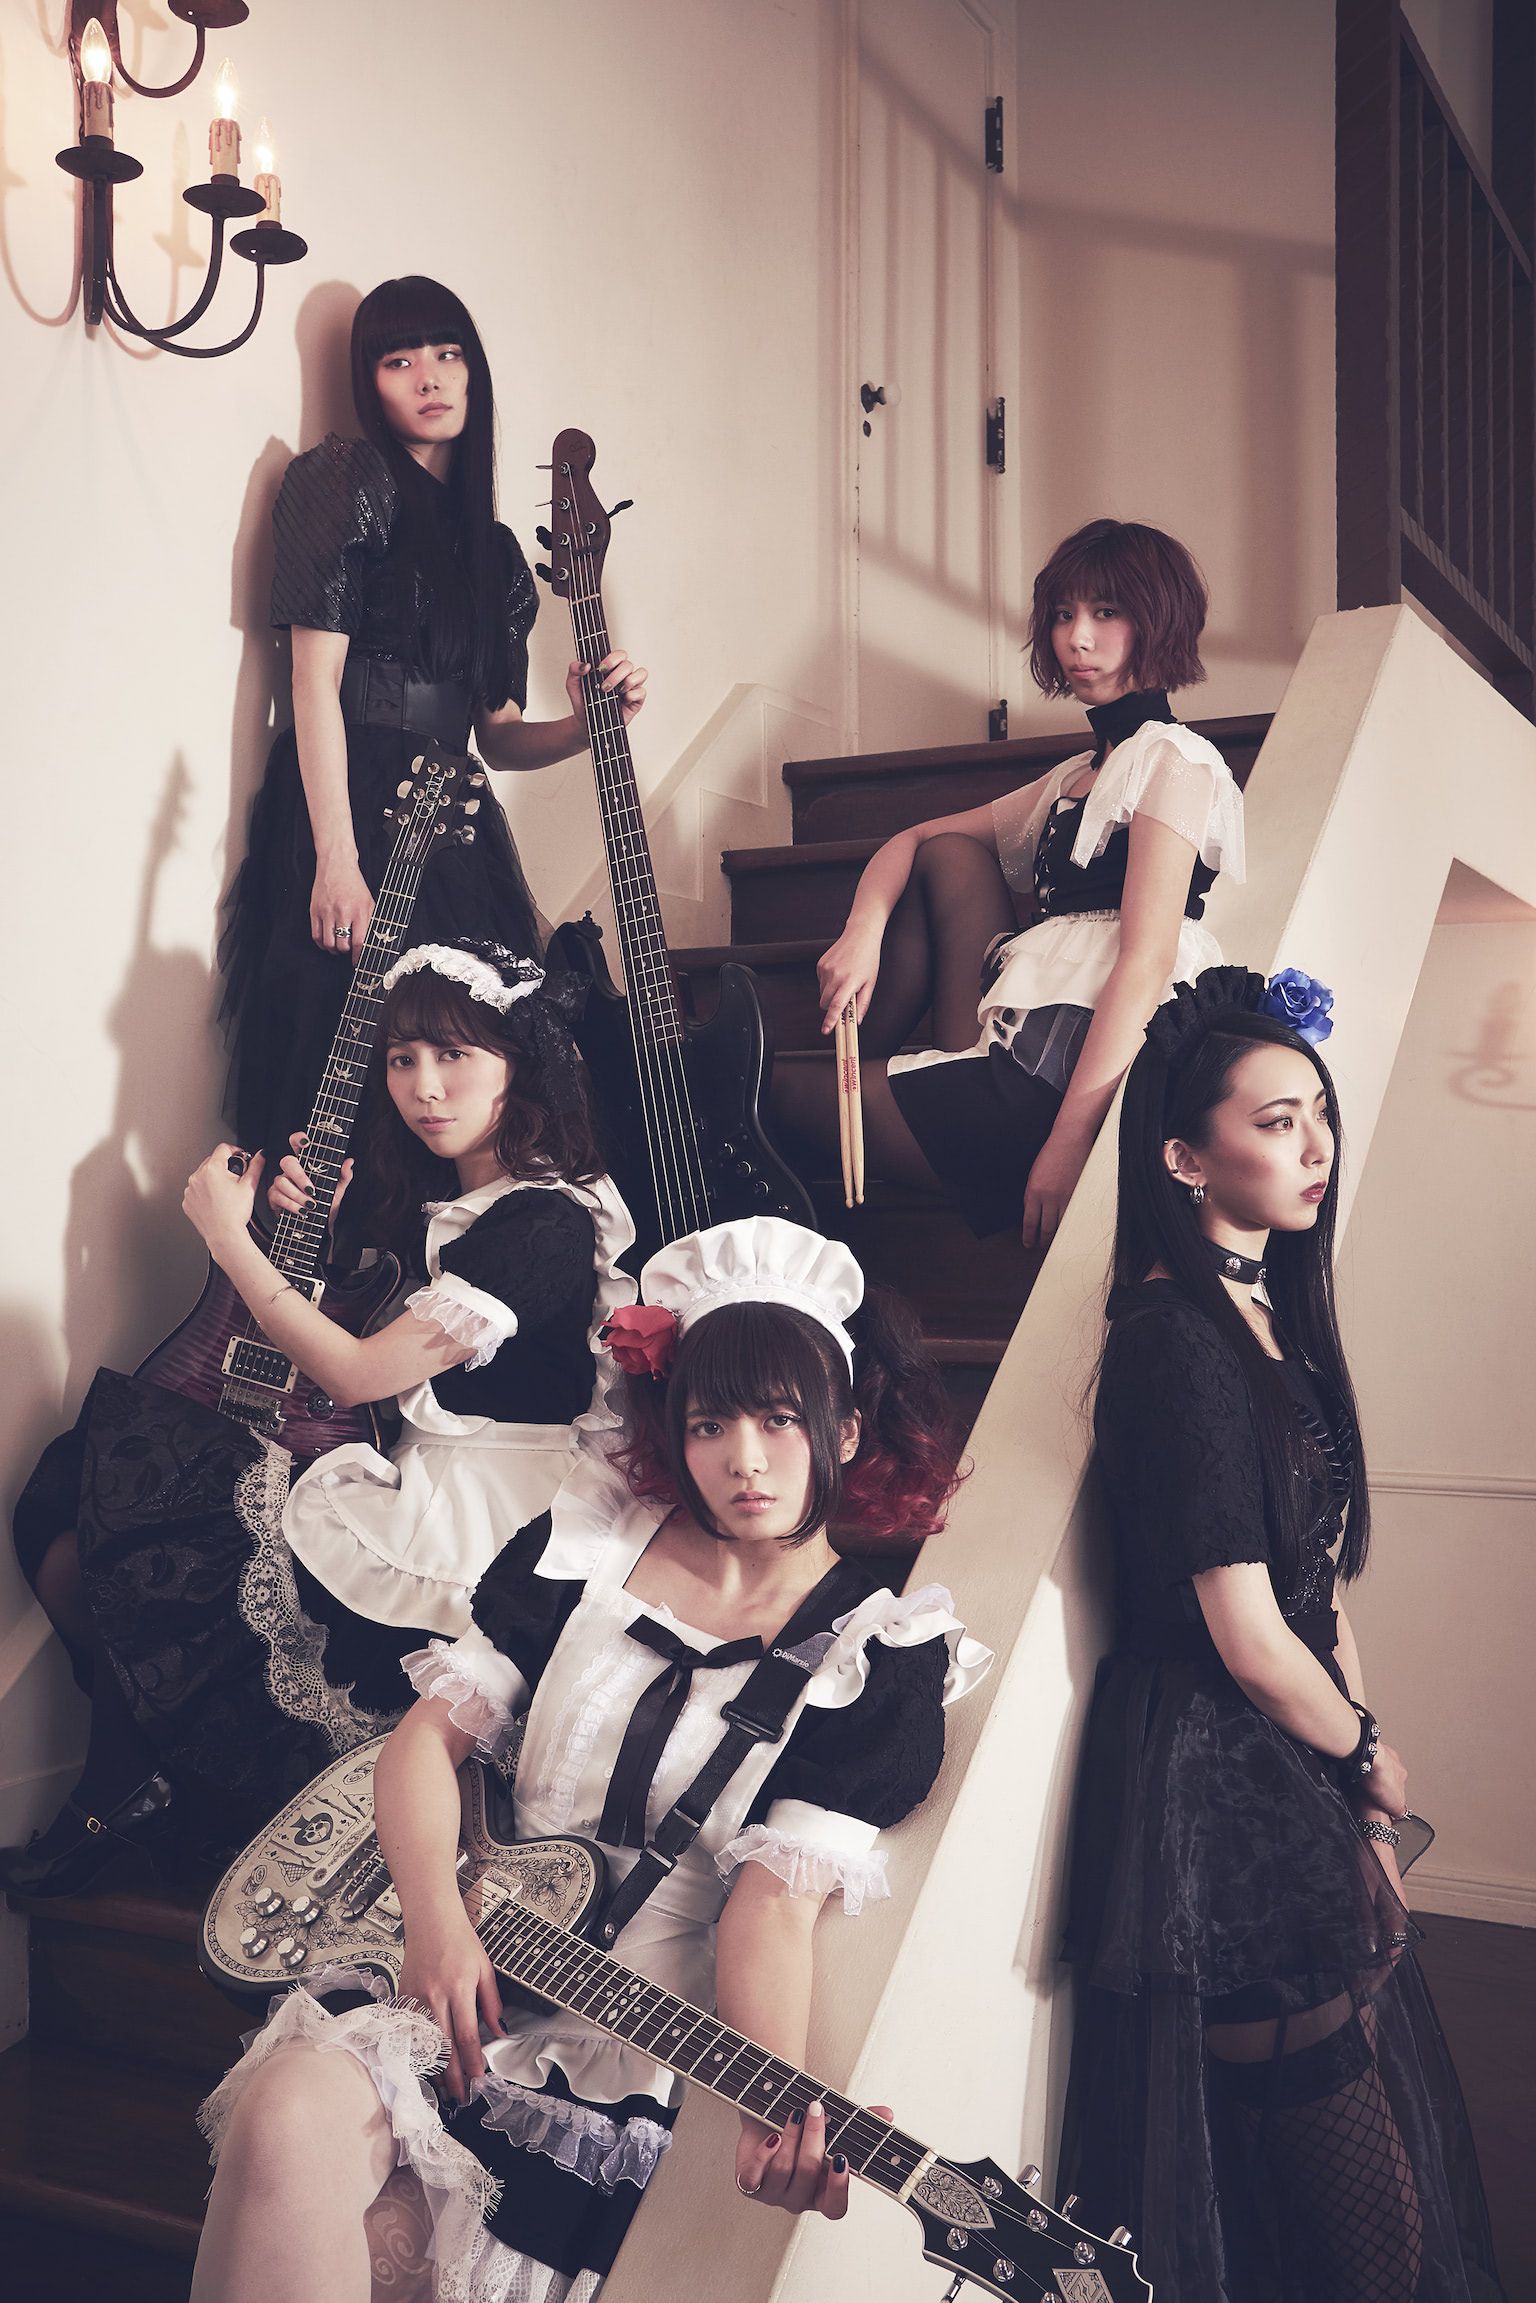 band maid full discography download